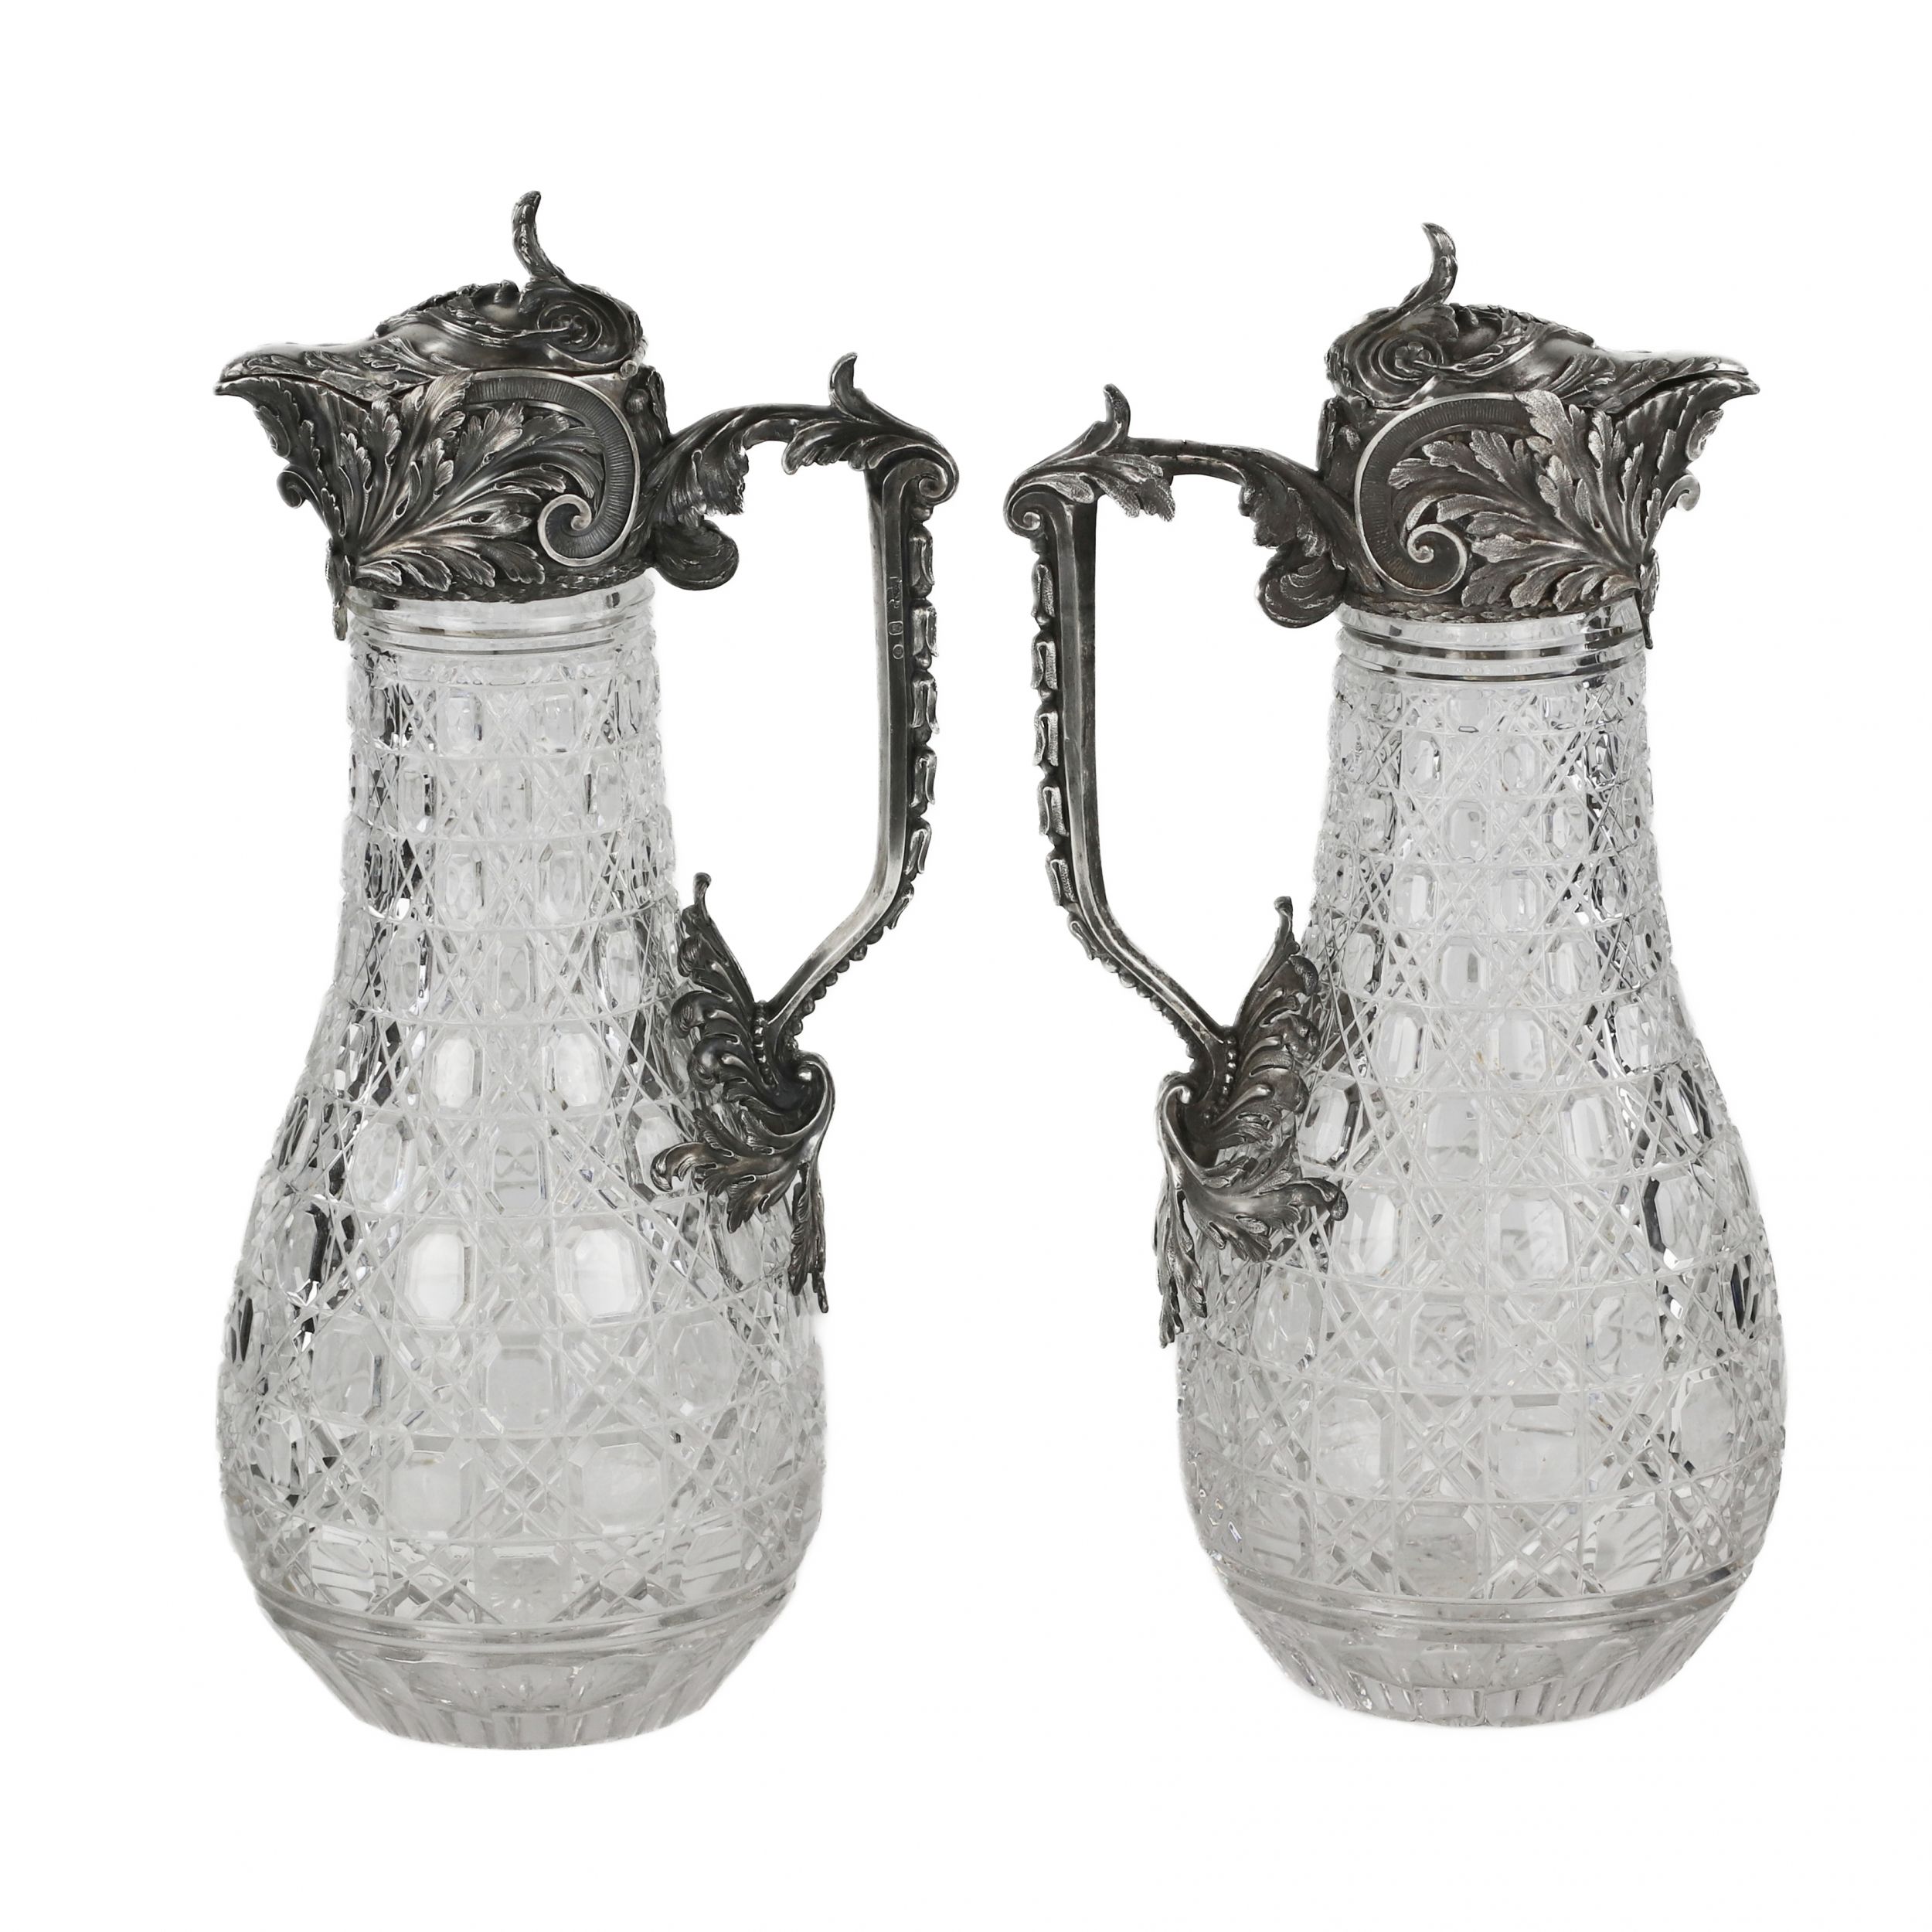 A magnificent pair of cast crystal wine jugs in superb BOLIN silver. Moscow. Russia 19th century. - Image 2 of 7